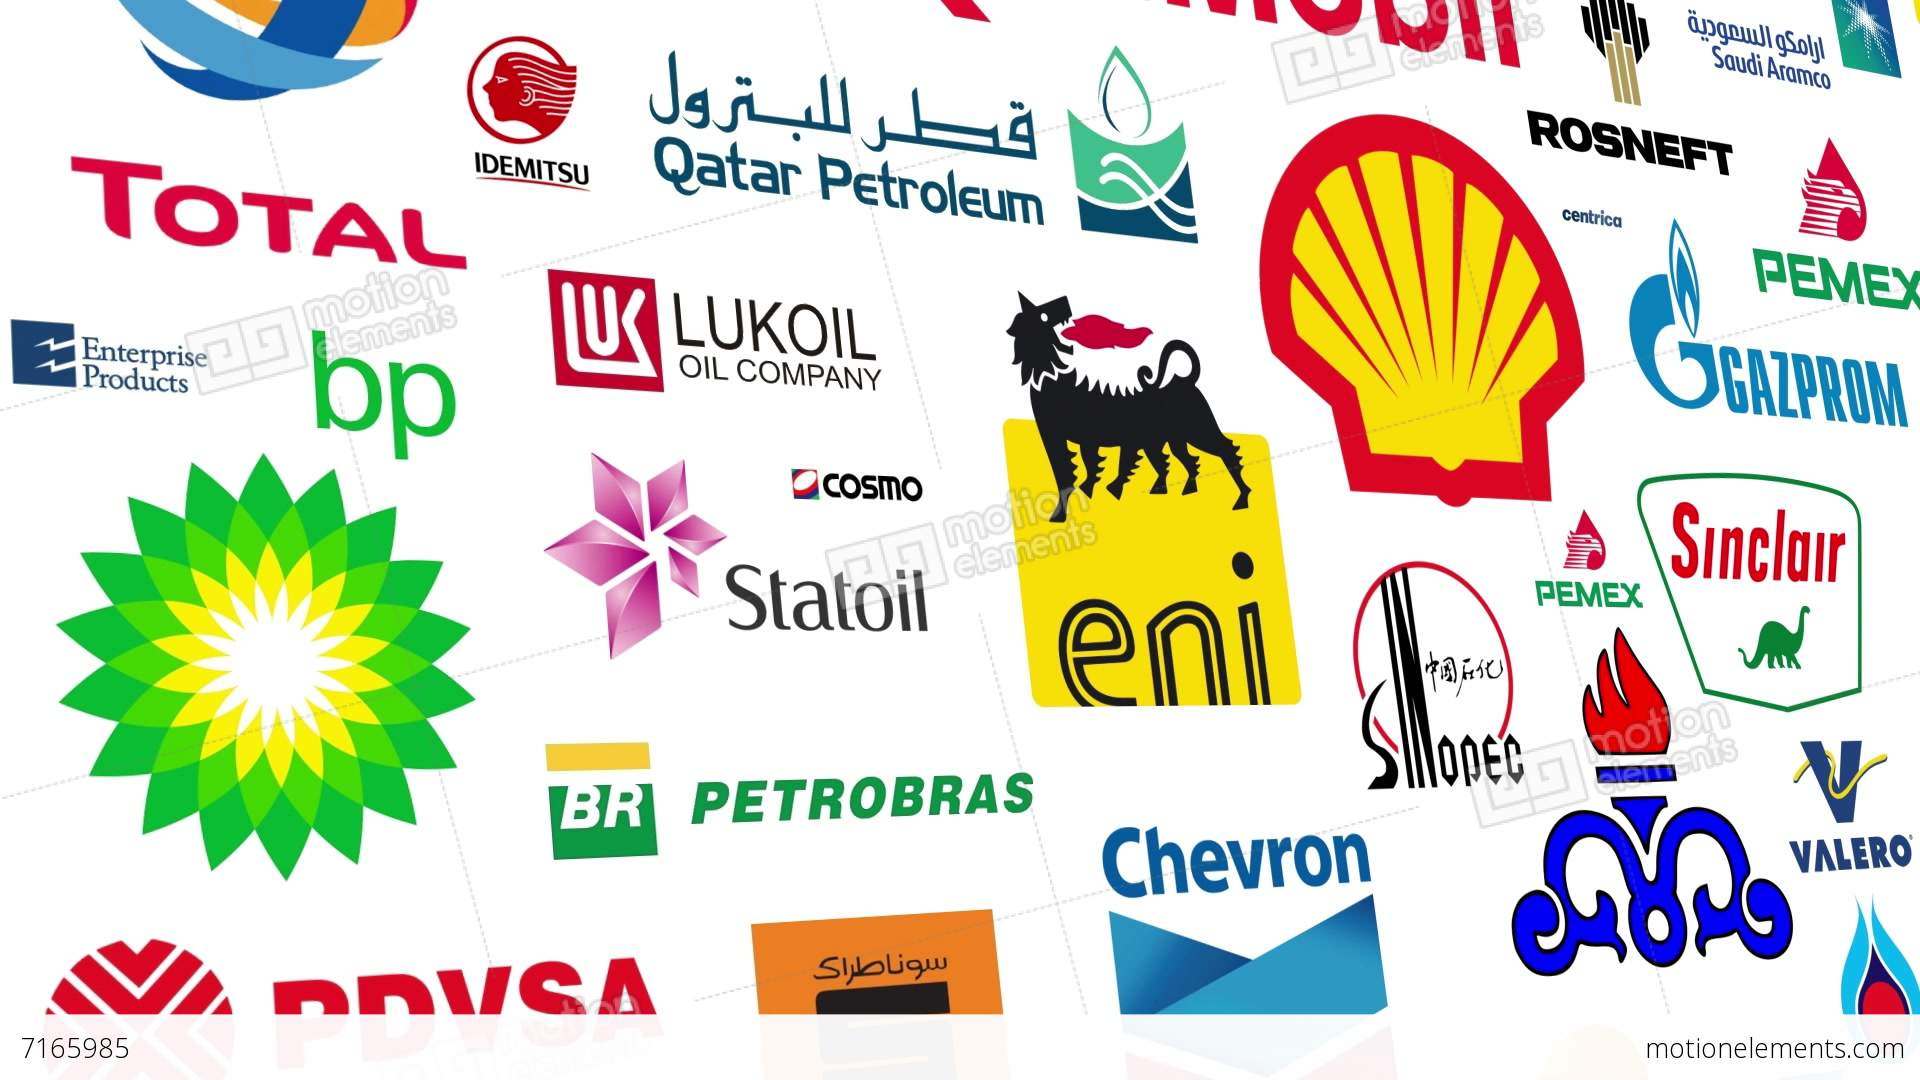 Mobil Oil Company Logo - Oil and Gas Industry: Salary of Shell, Total, Mobil, Schlumberger ...